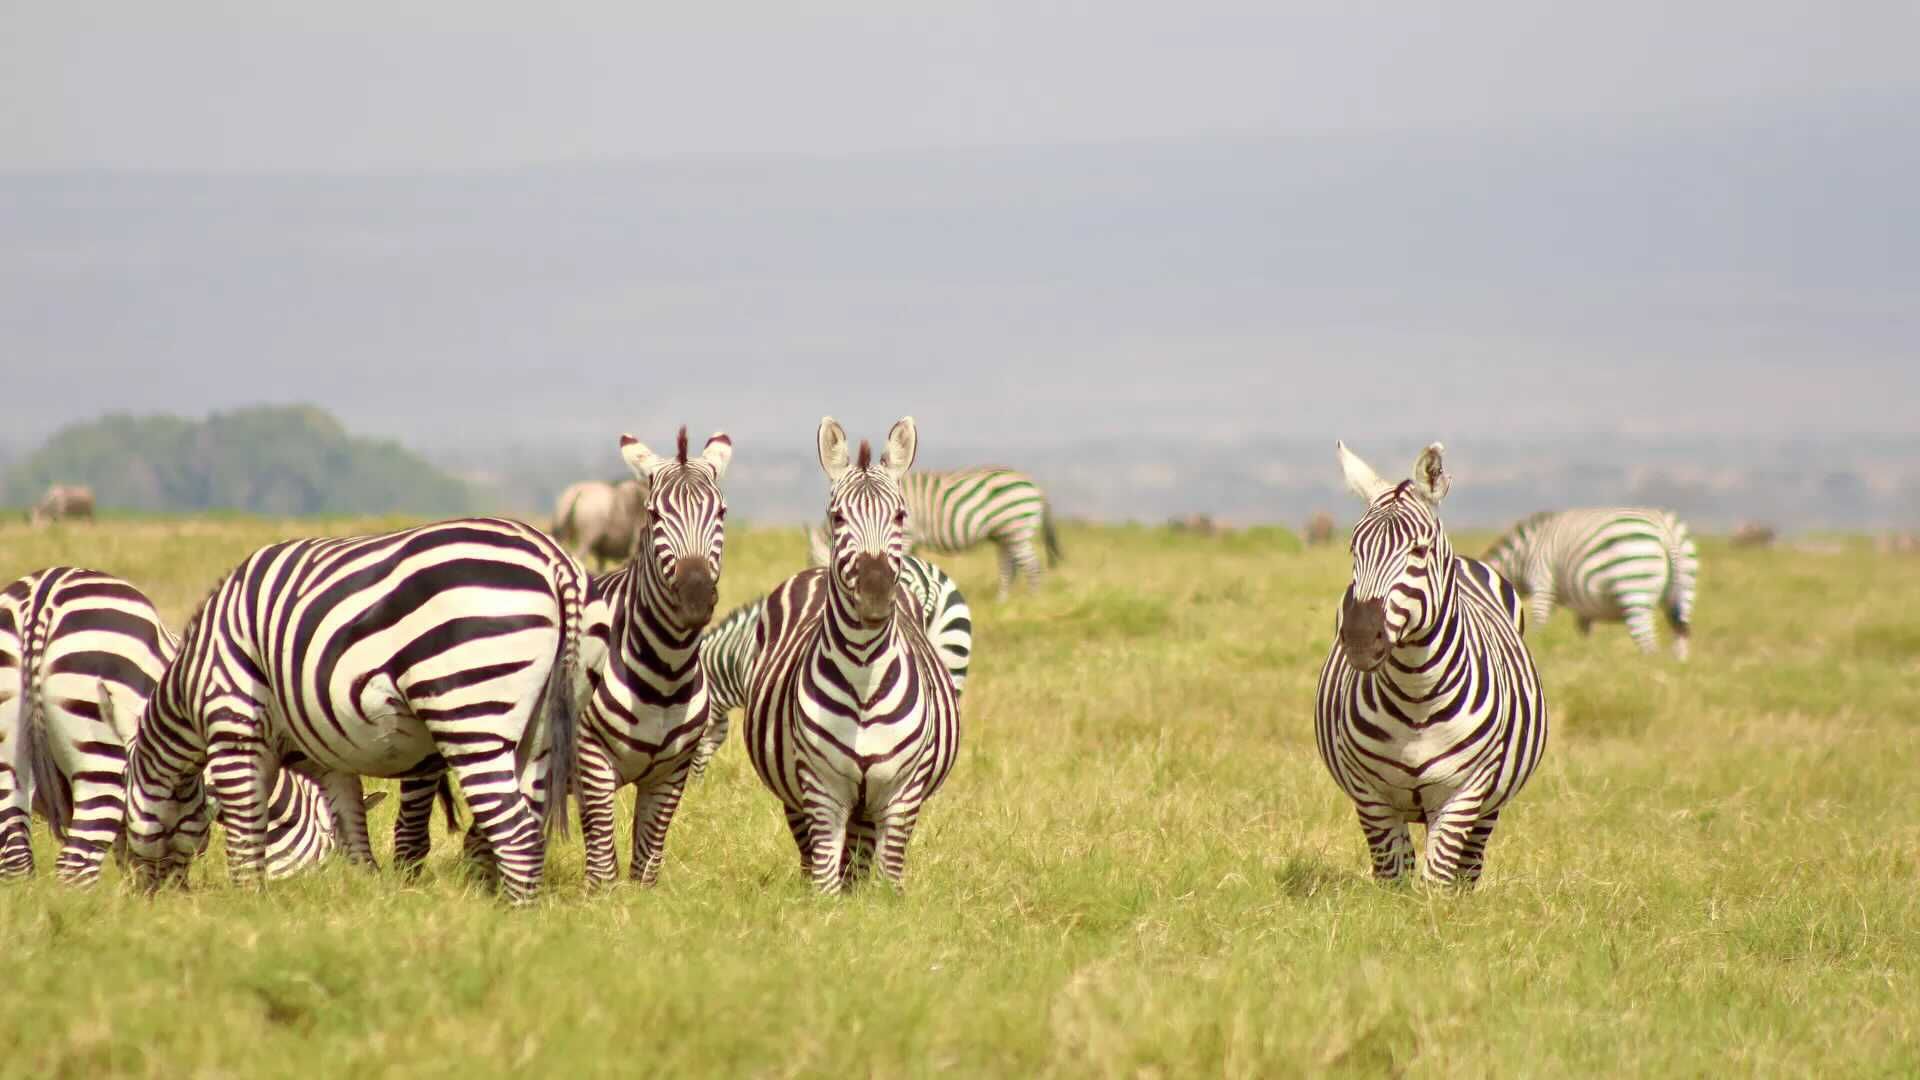 Zebras stand in the savannah.